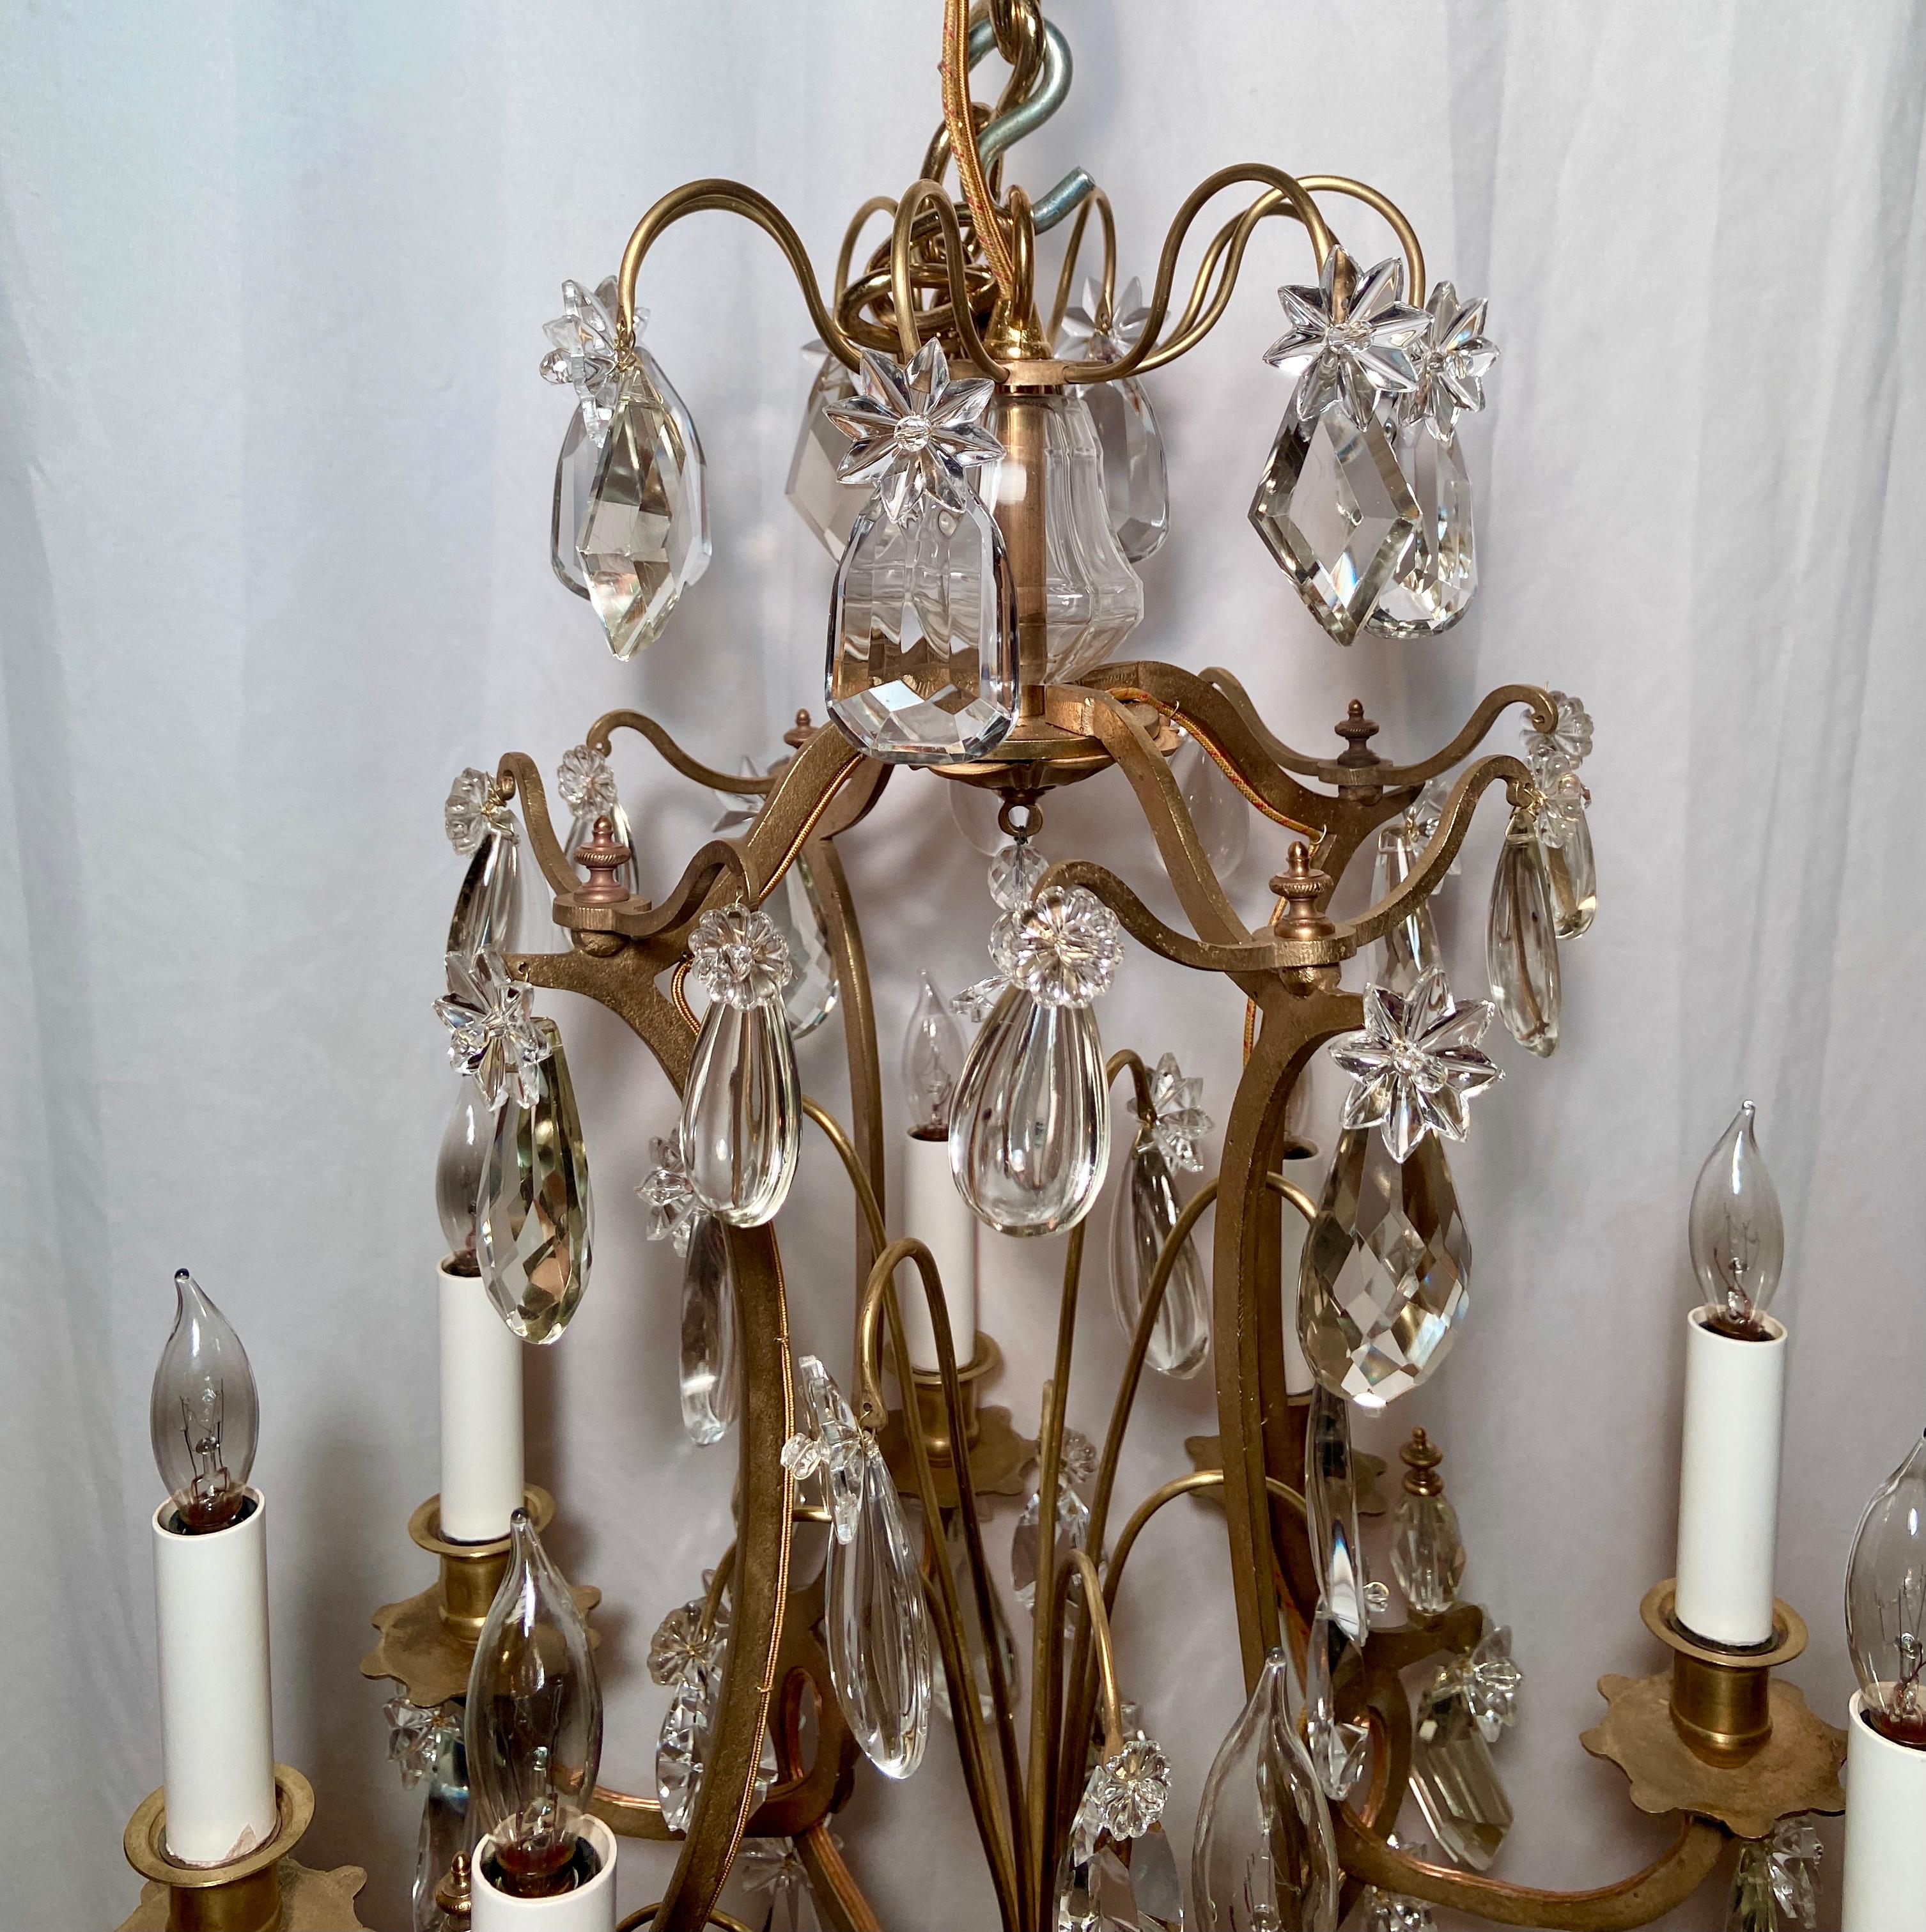 Small antique French gold bronze and crystal chandelier, Circa 1890.